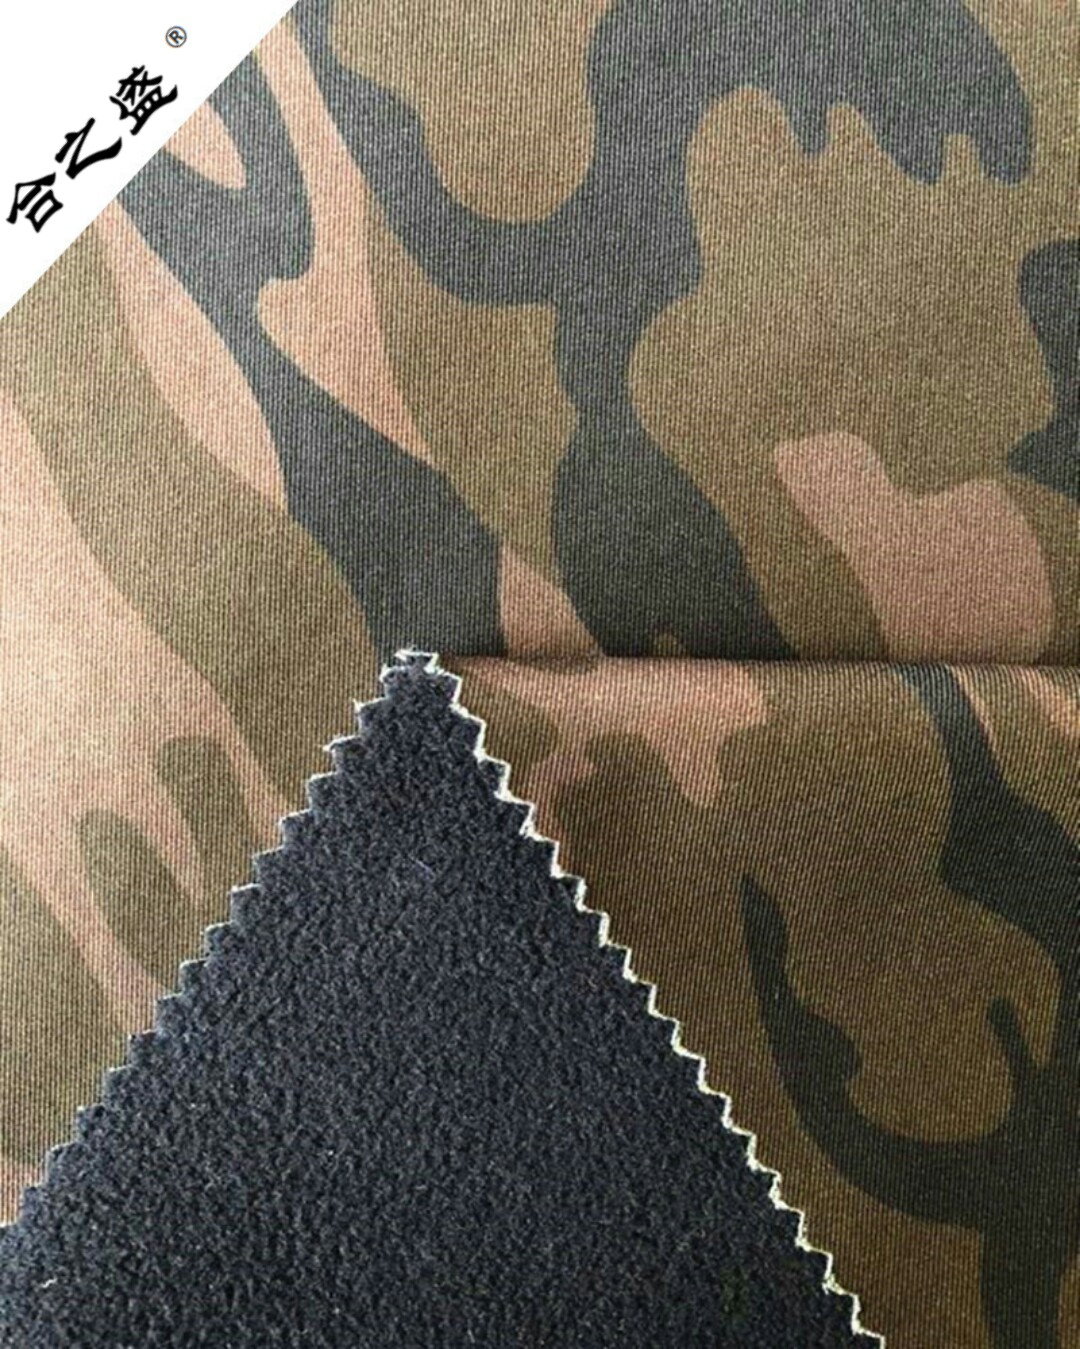 Army Camouflage Printed Fabric Lamination For Jacket